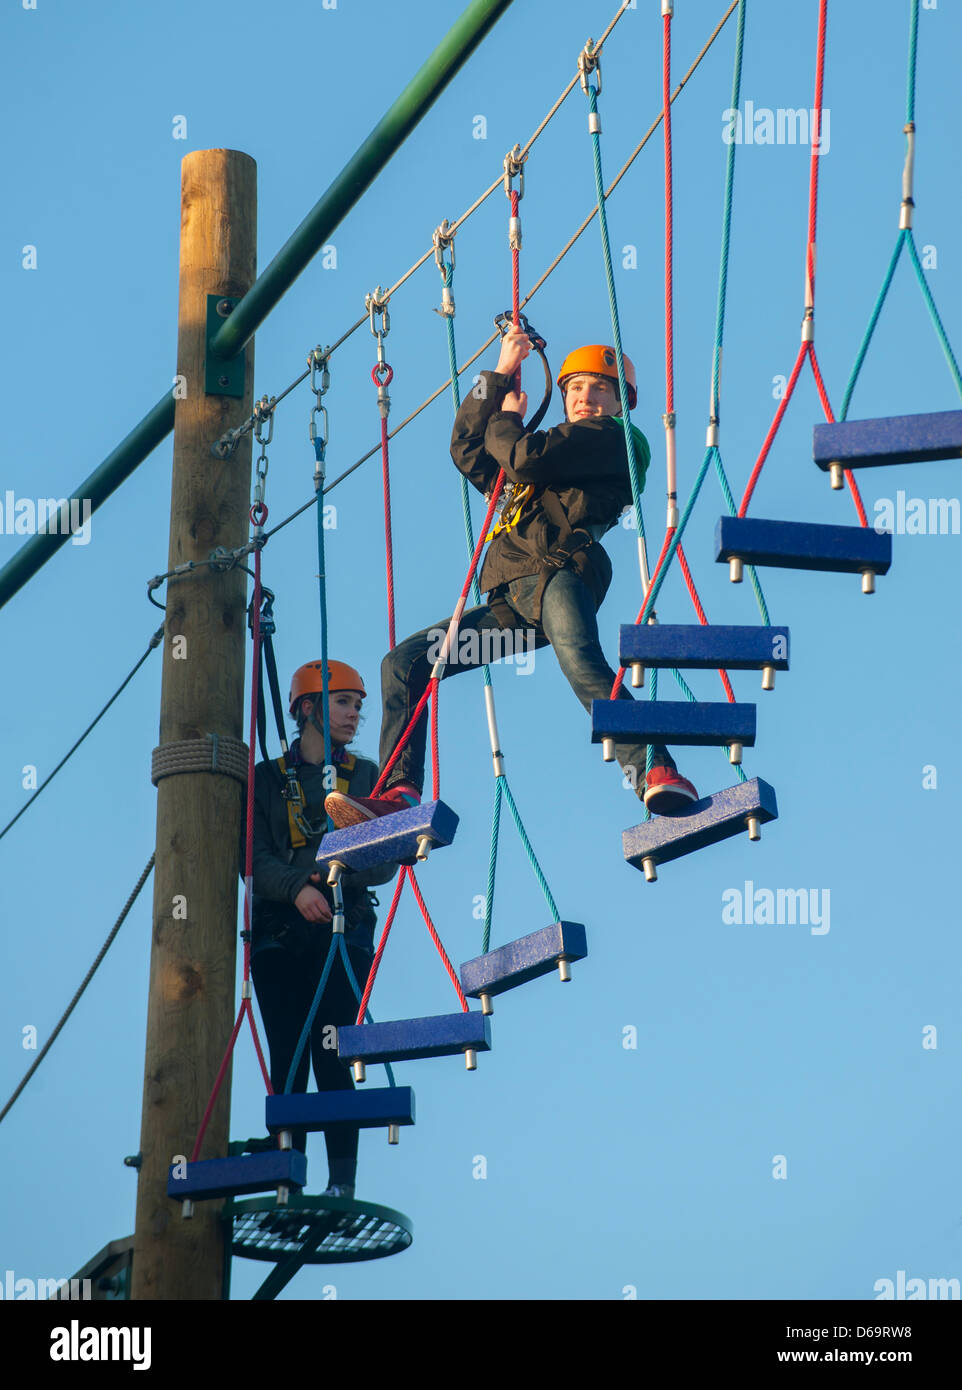 Teenage boys climbing on obstacle course Stock Photo